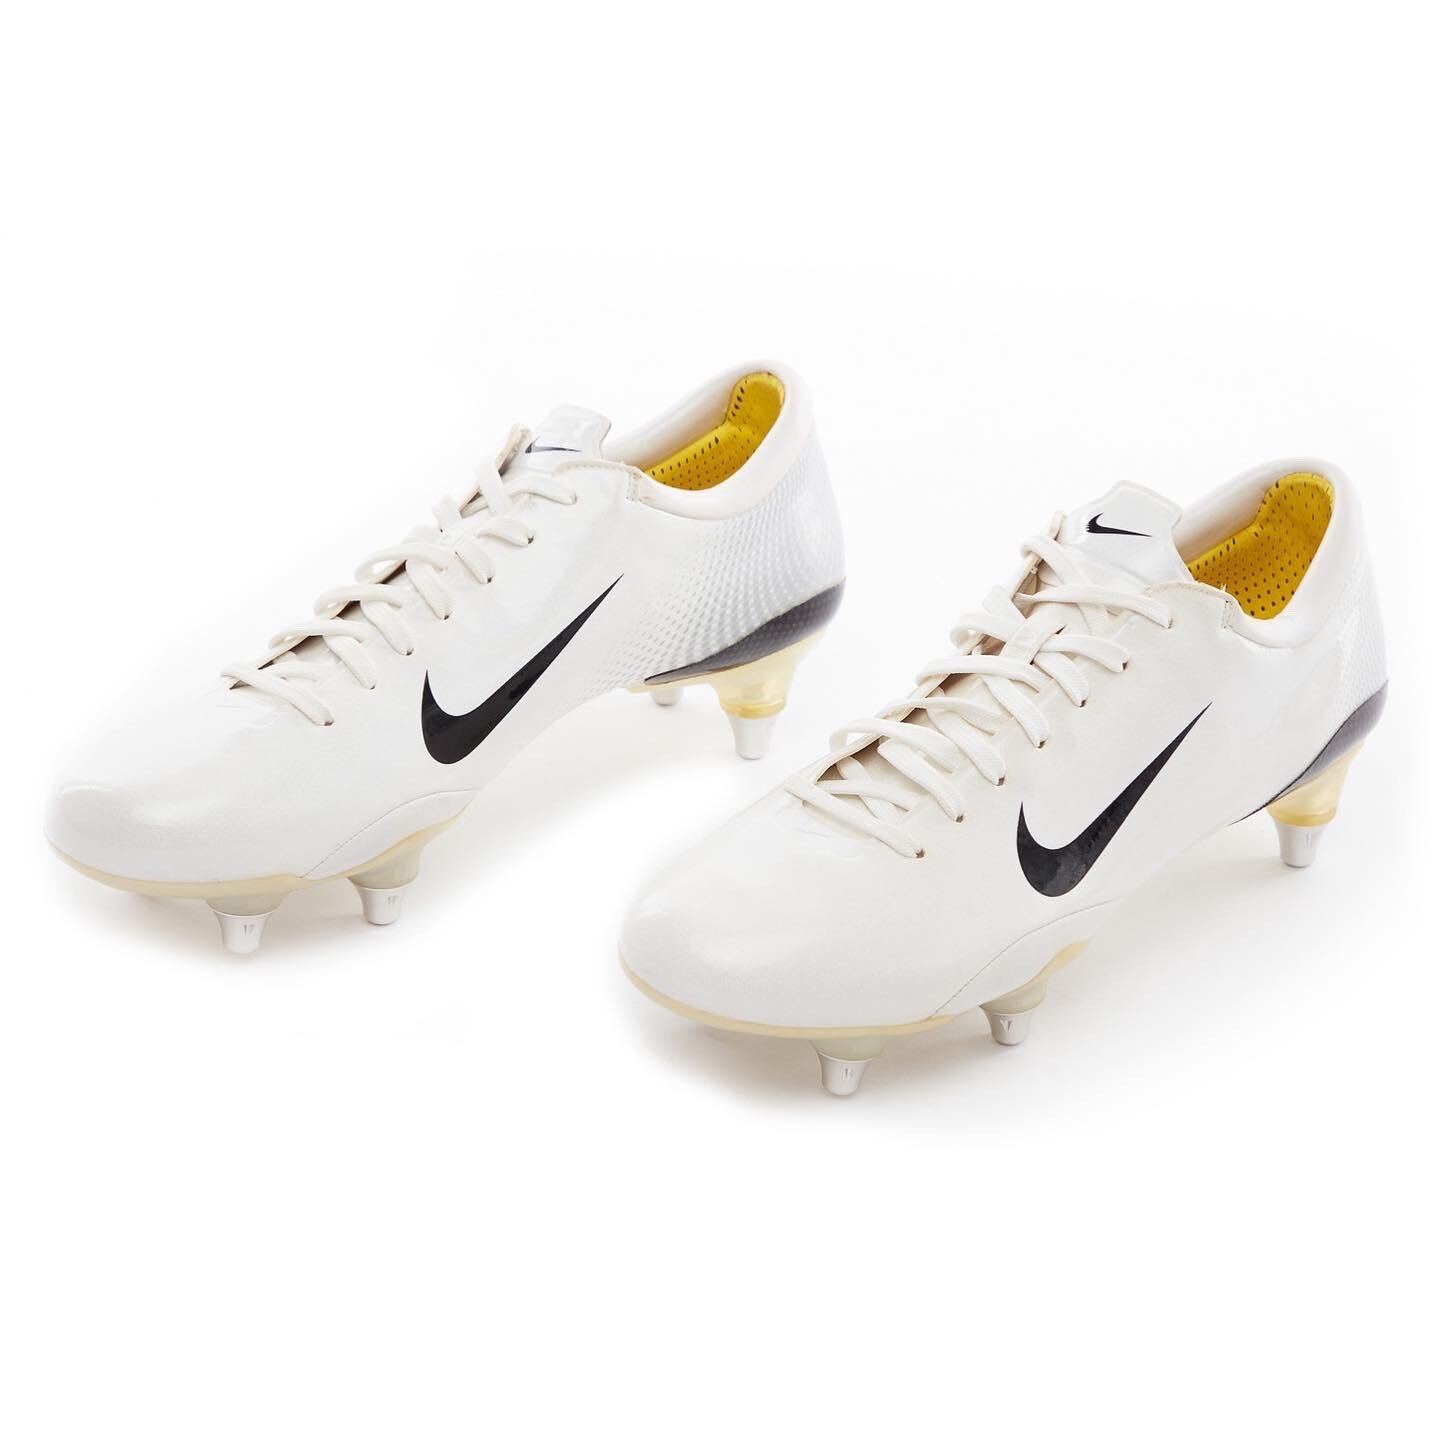 Classic Football Shirts on Twitter: "Thierry Henry x Nike Mercurial Vapor III This Mercurial Vapor III is one several used during 2005/06 season, Thierry Henry scored the memorable winner